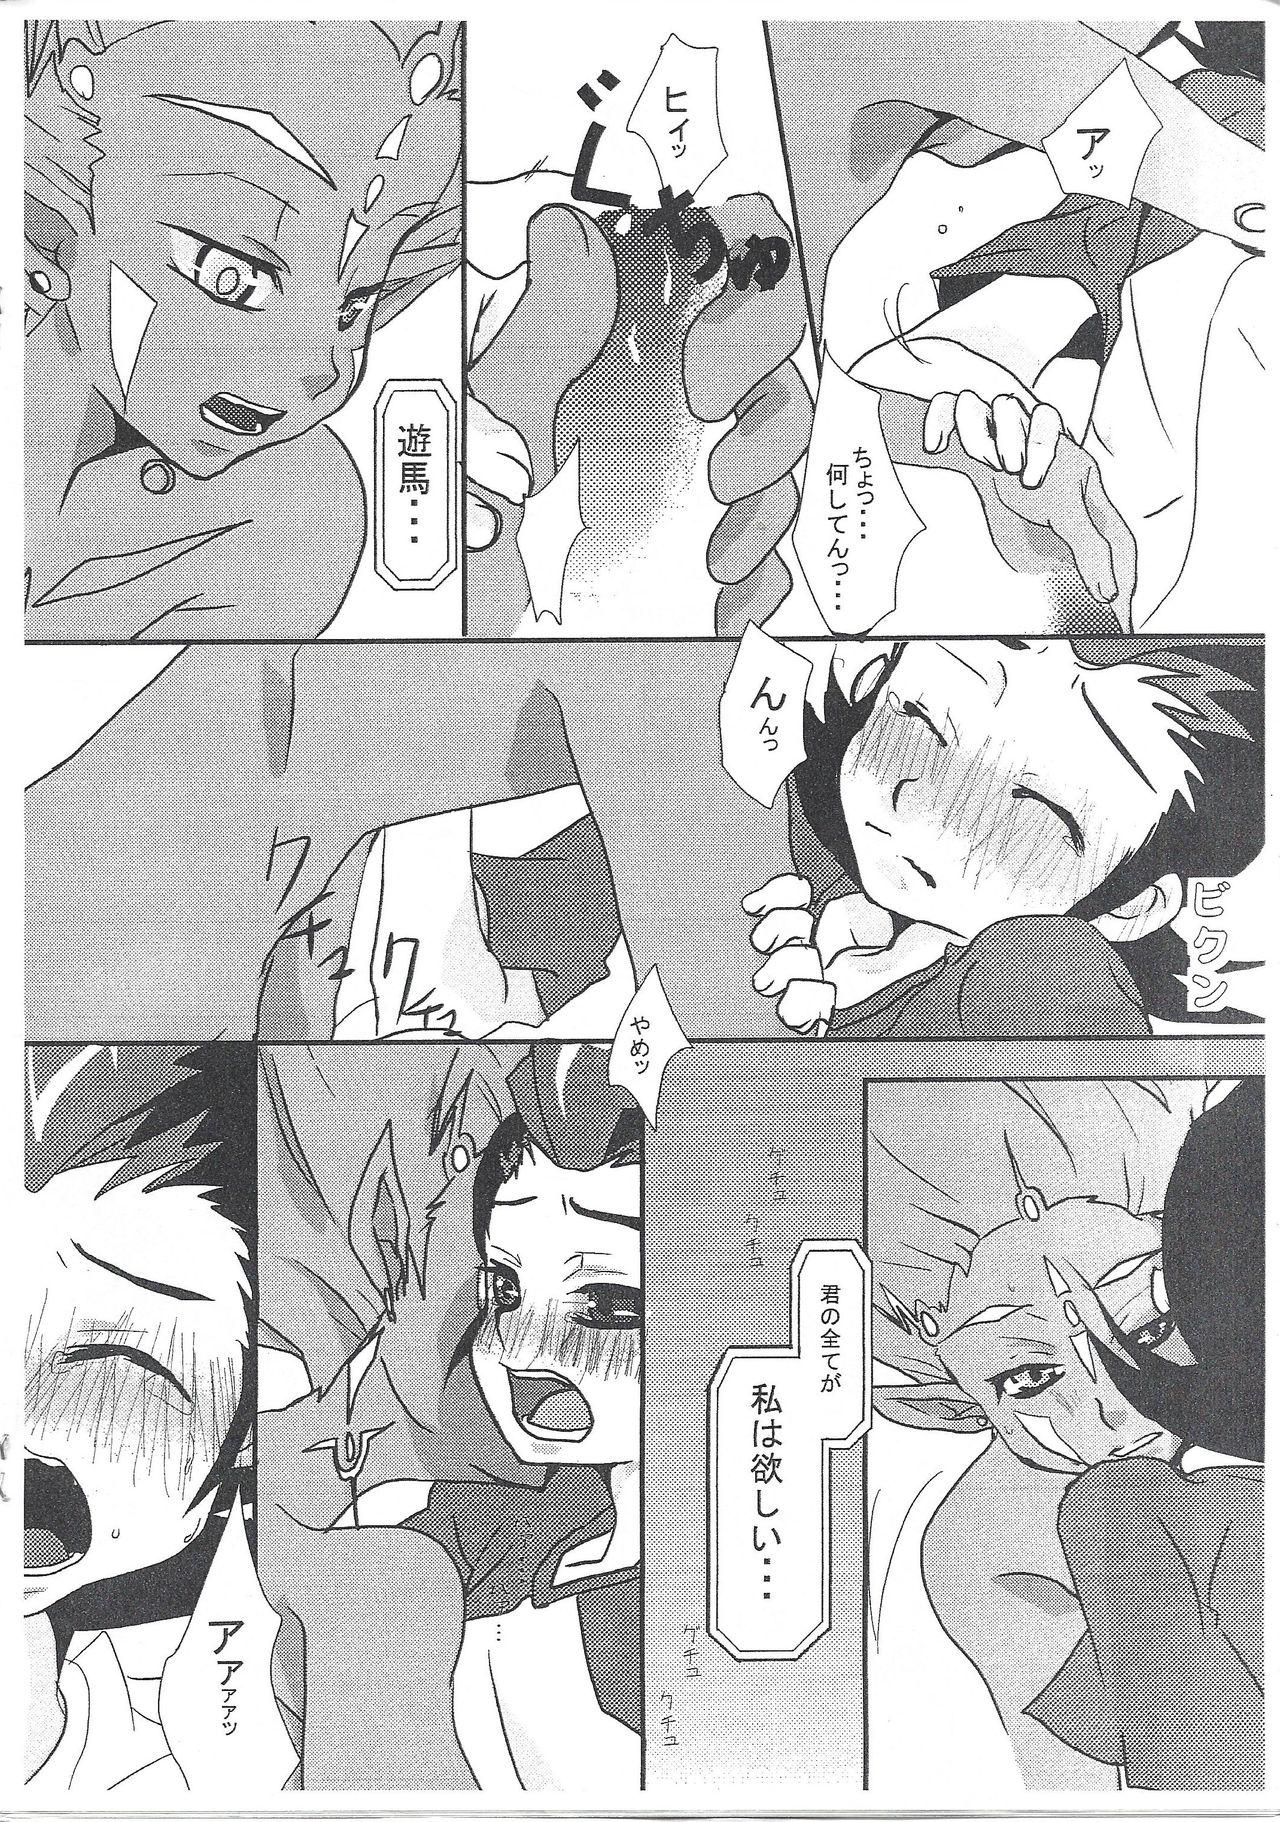 Foreplay 96 Night - Yu-gi-oh zexal Free Oral Sex - Page 9